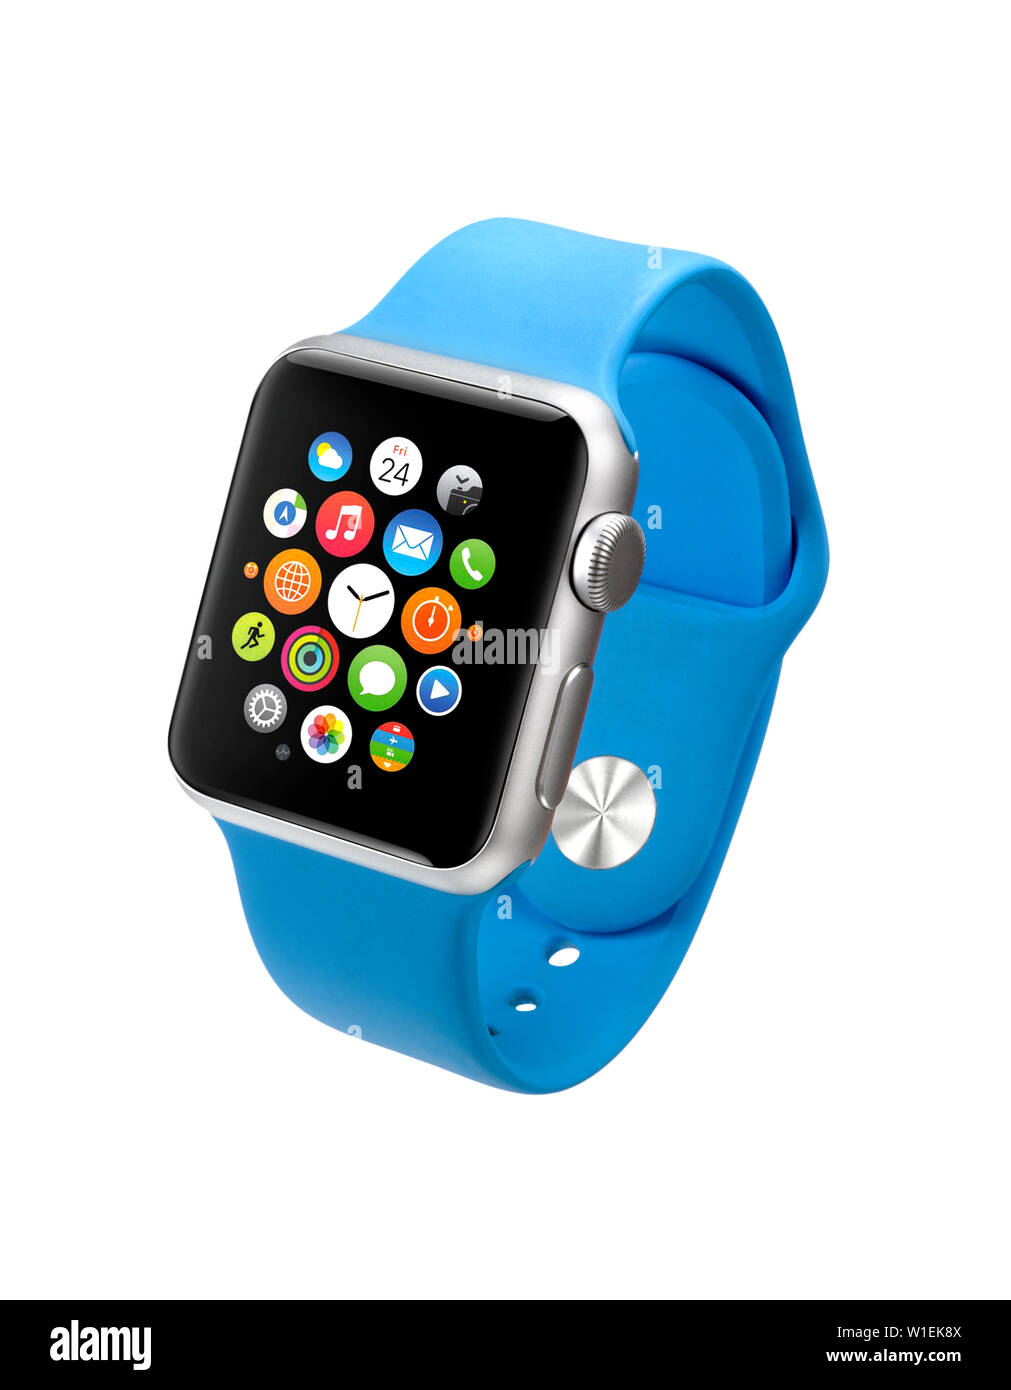 An Apple watch with blue band Stock Photo